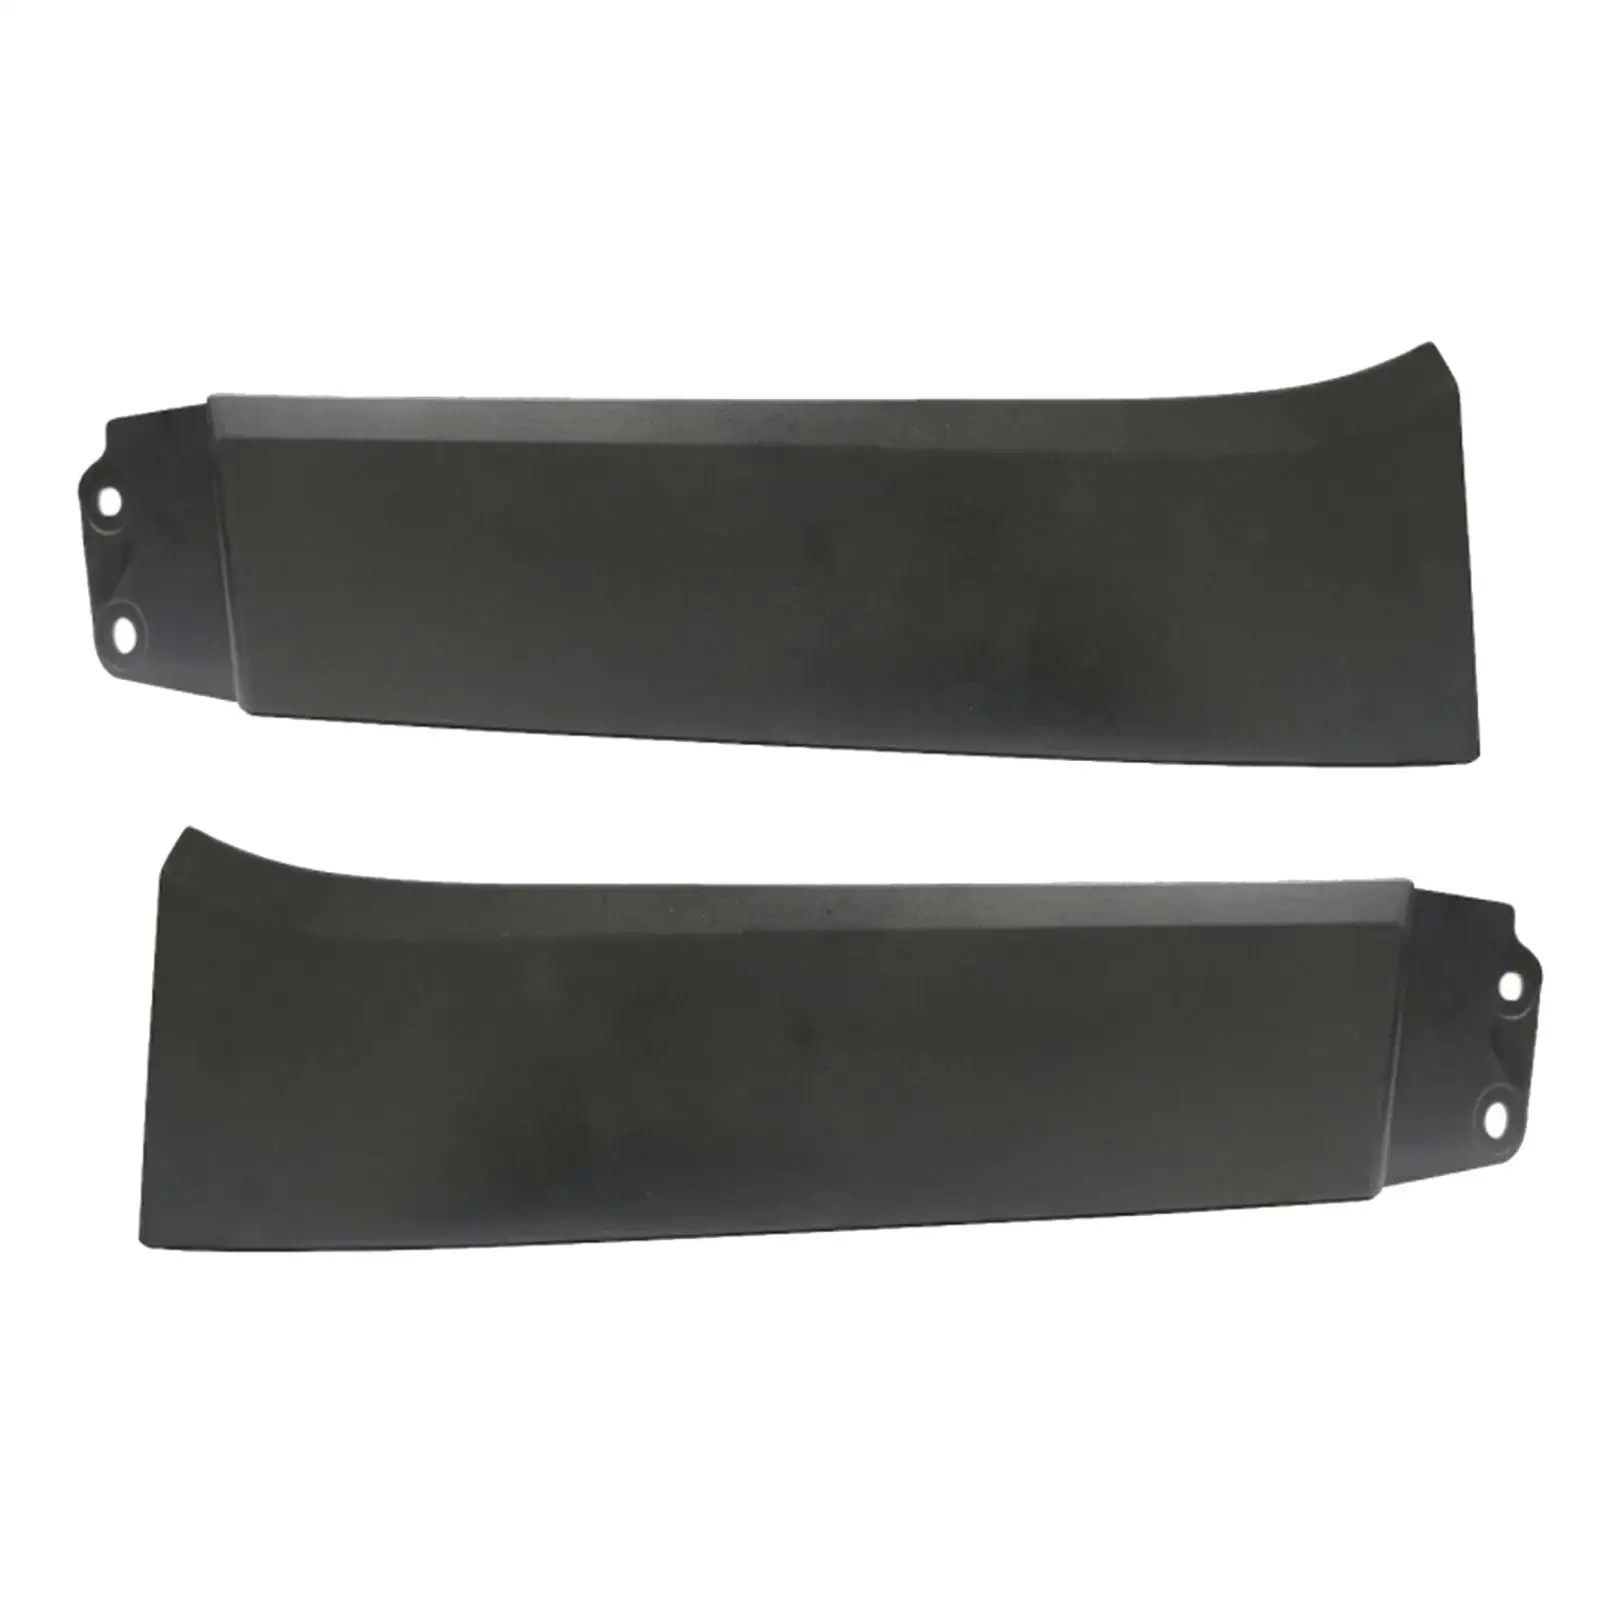 53932-0C904 Replaces Front below Headlight Extension Panels Headlight Molding Lower Filler Set for 2007-2013